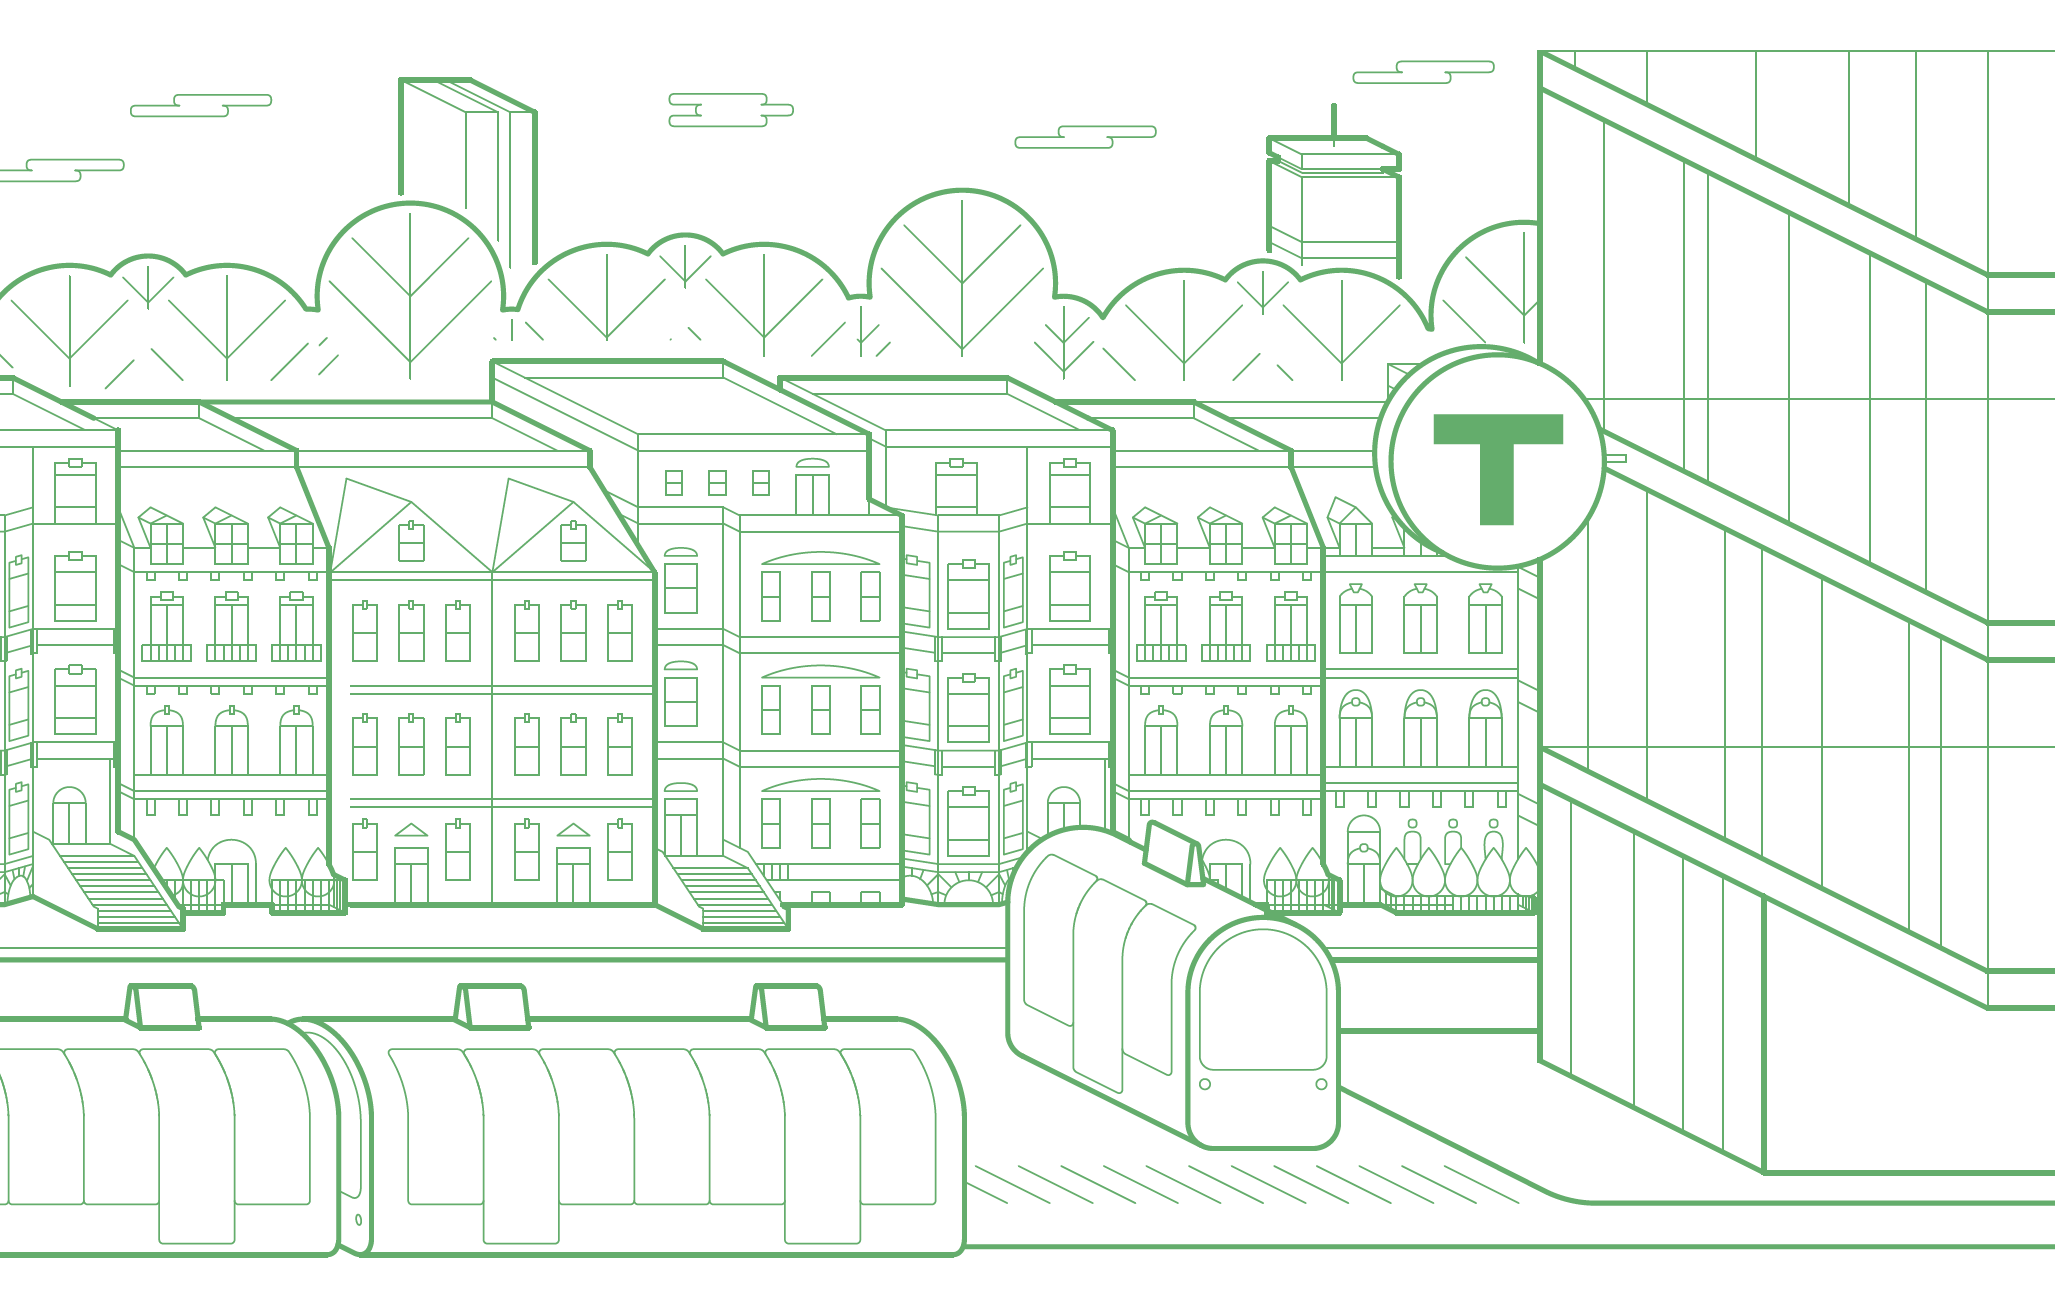 Illustration of the Boston cityscape, with brownstones, trains, and a T logo